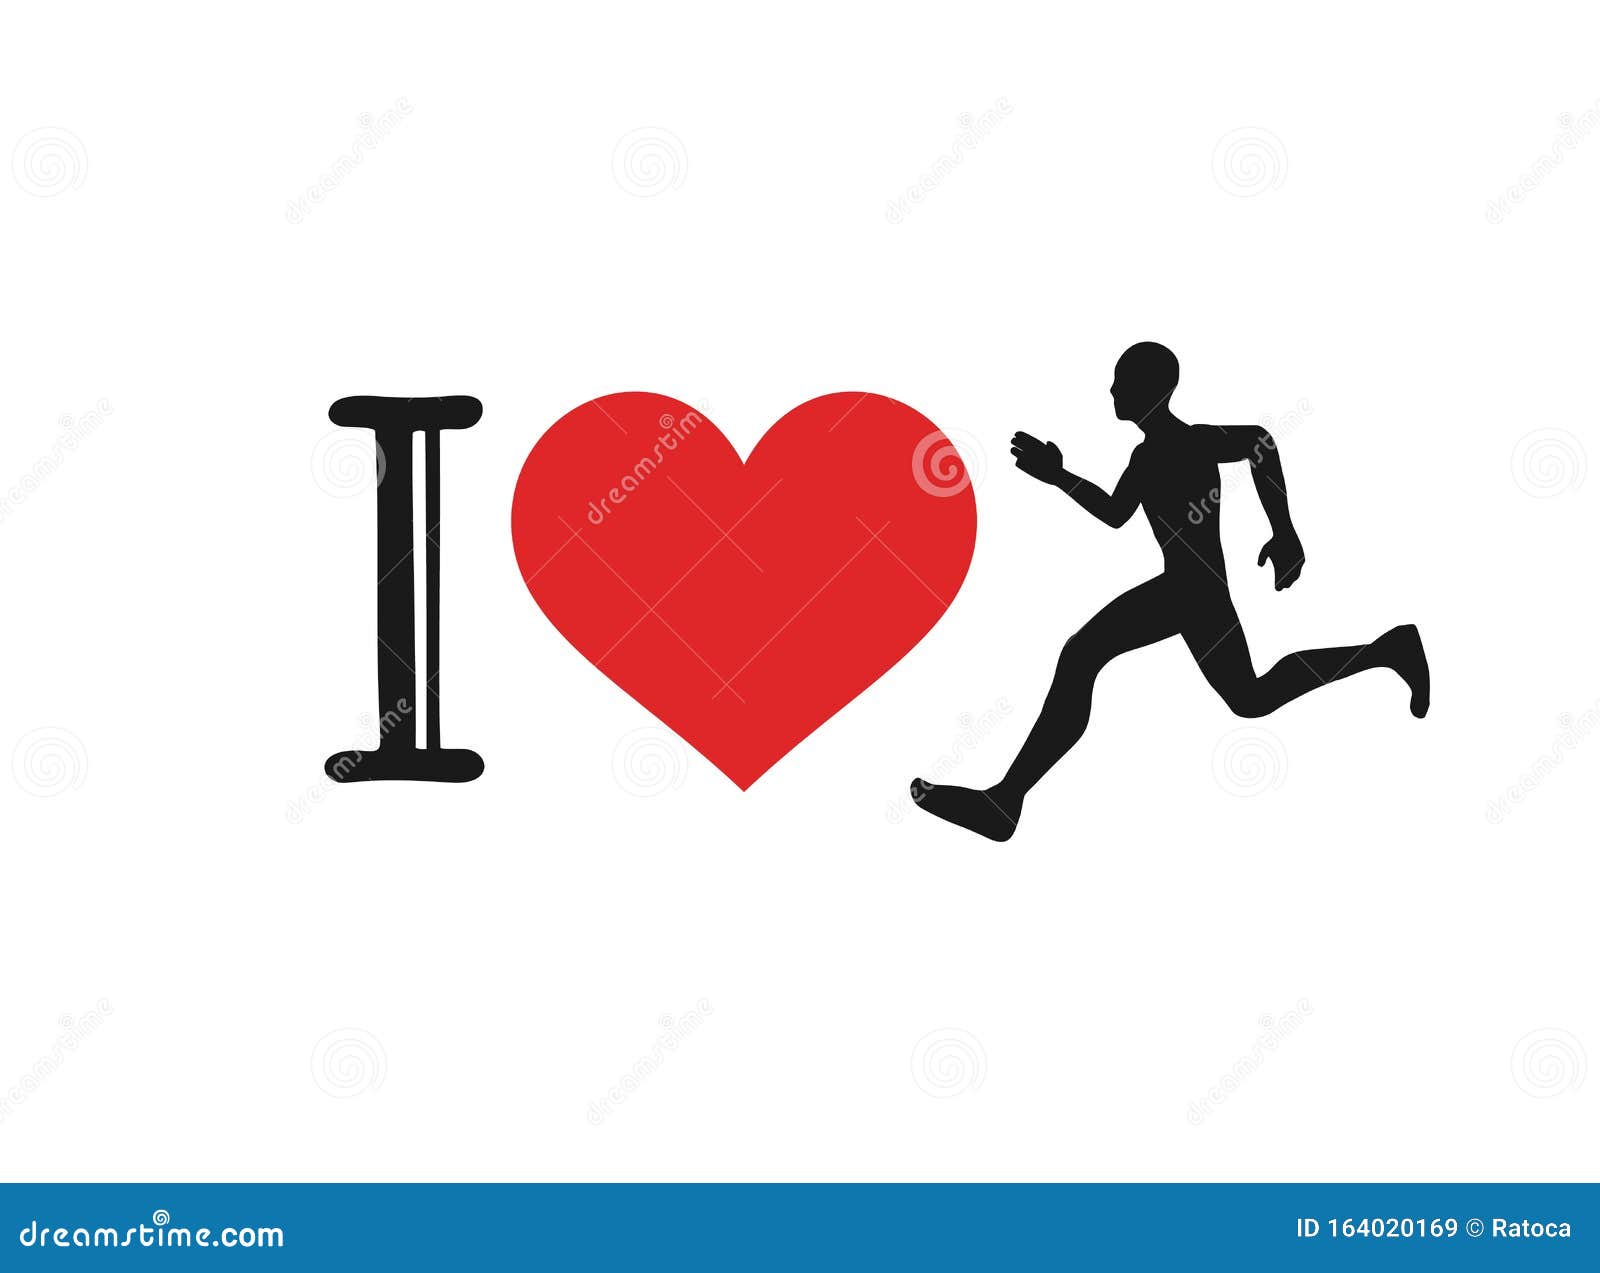 How To Love Running.